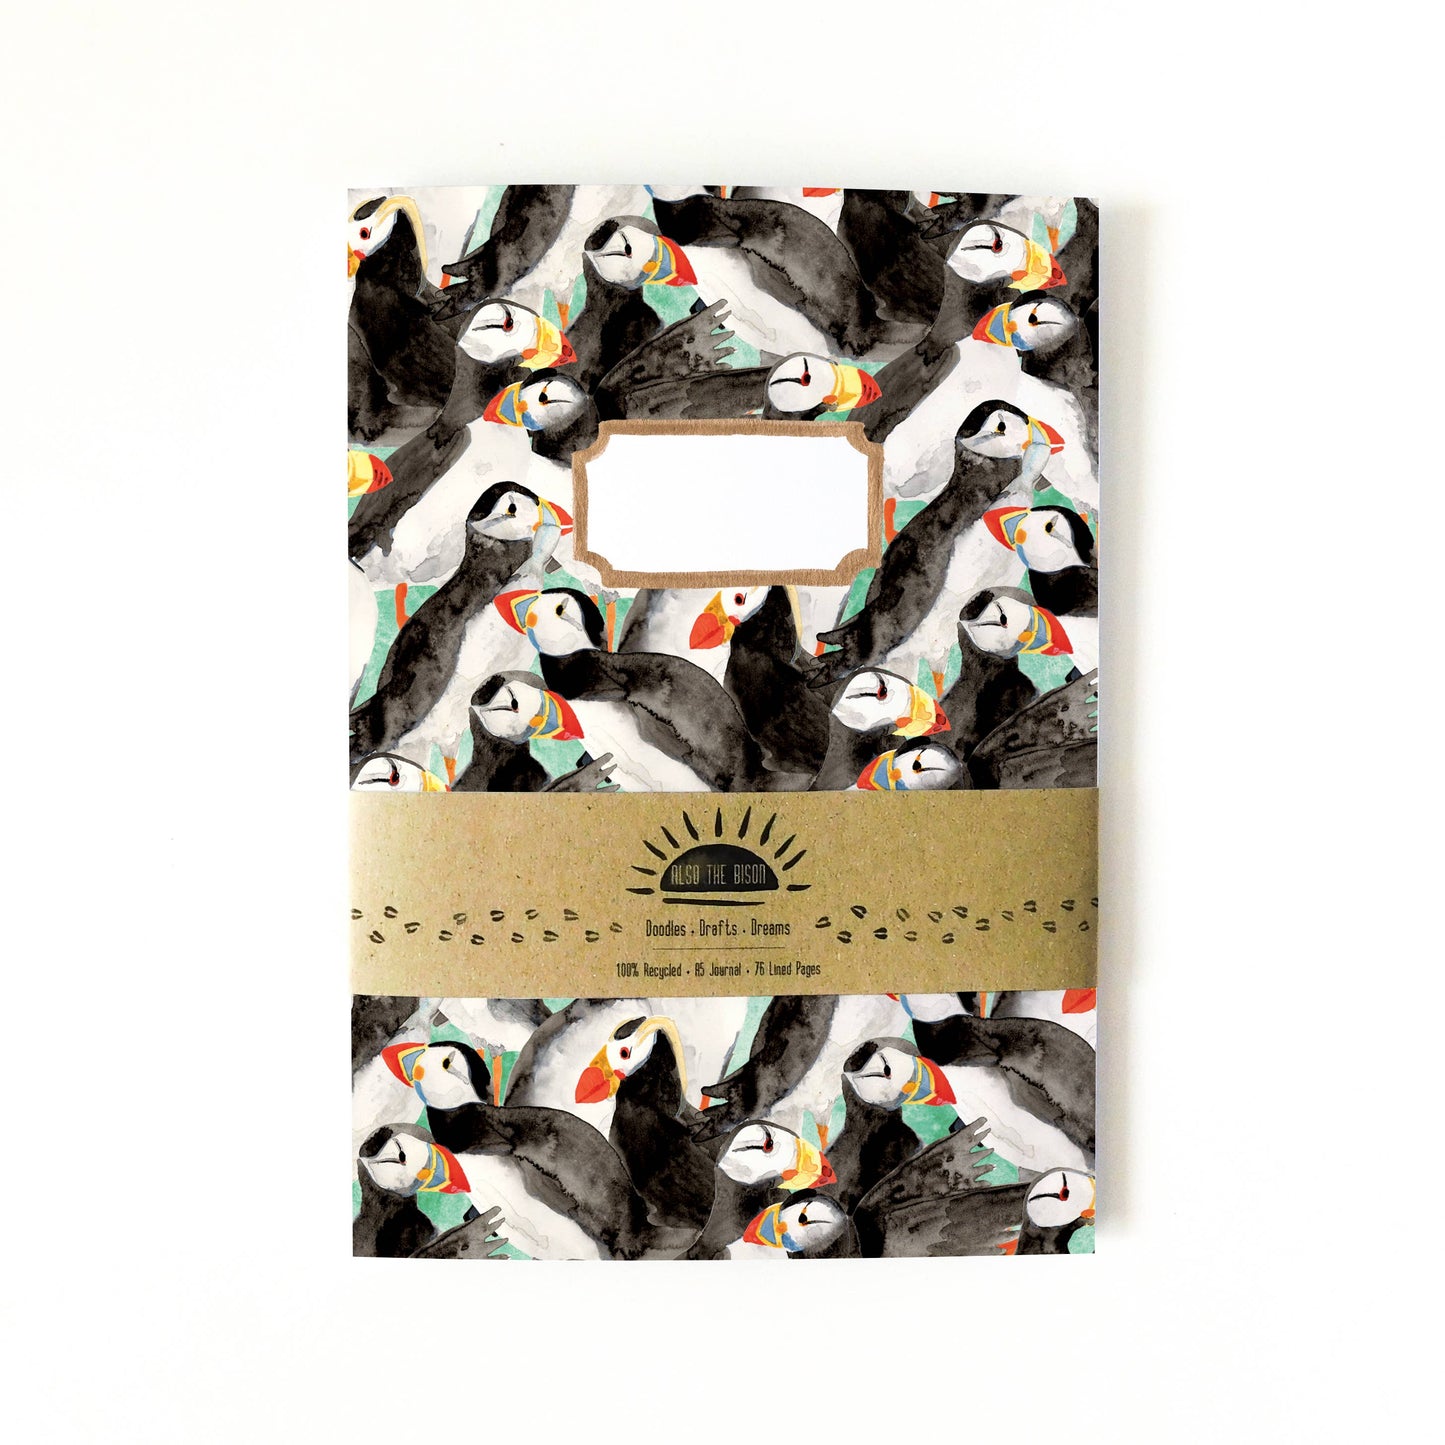 Improbability of Puffins Lined Journal by Also the Bison